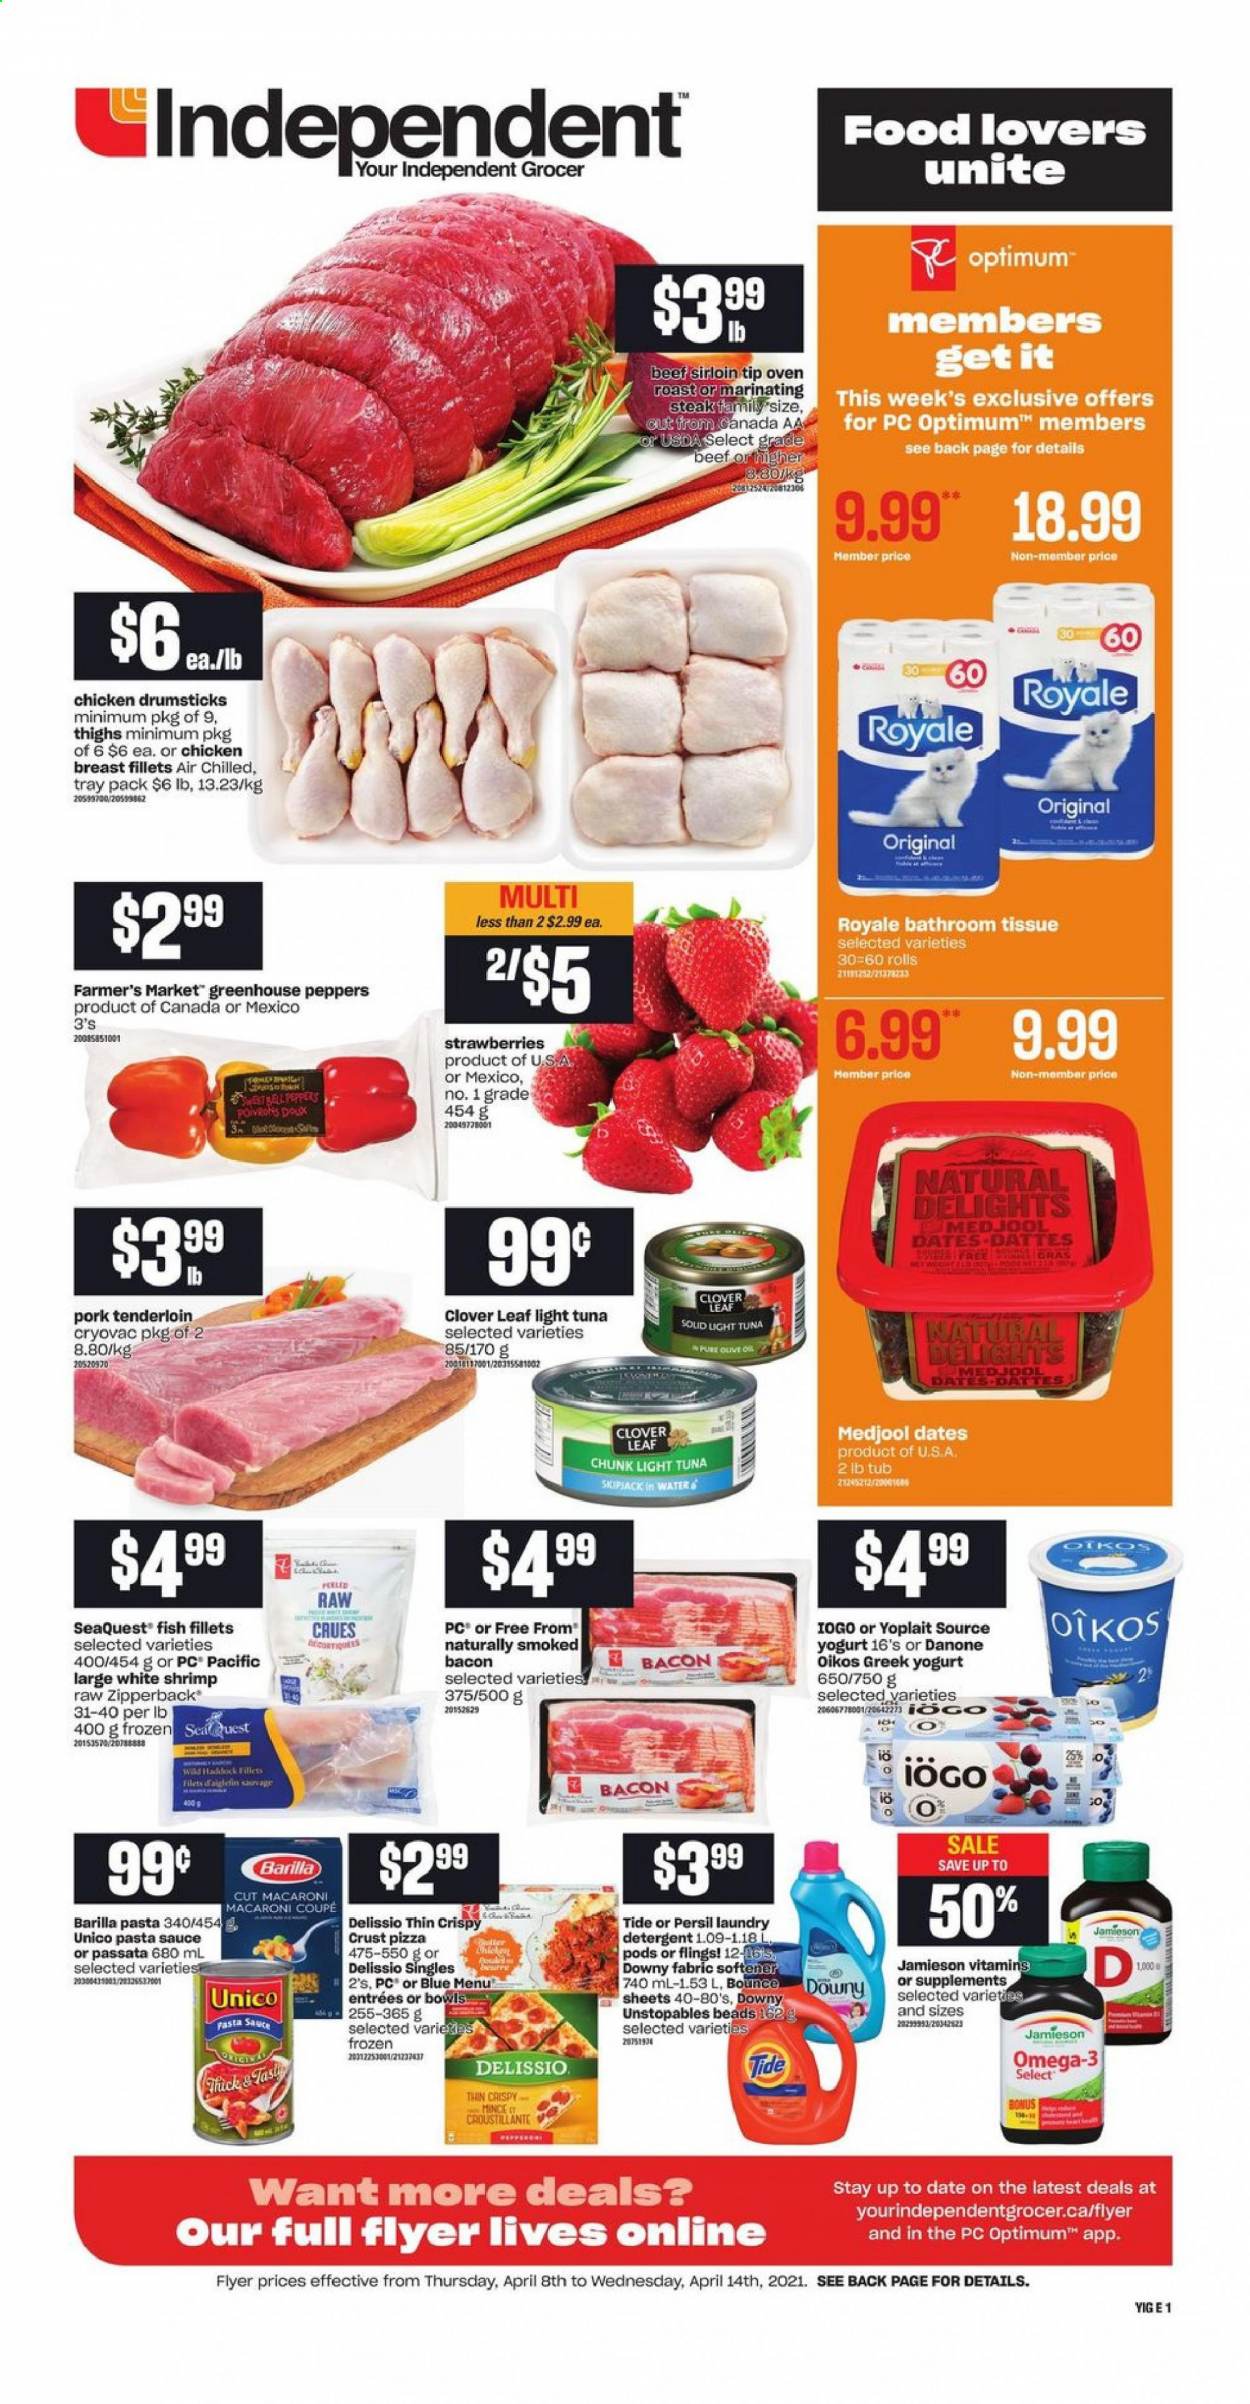 thumbnail - Independent Flyer - April 08, 2021 - April 14, 2021 - Sales products - peppers, strawberries, fish fillets, tuna, haddock, fish, shrimps, pizza, pasta sauce, macaroni, Barilla, bacon, greek yoghurt, yoghurt, Clover, Oikos, Yoplait, light tuna, dried dates, chicken breasts, chicken drumsticks, chicken, beef meat, beef sirloin, pork meat, pork tenderloin, bath tissue, Tide, Unstopables, Persil, fabric softener, laundry detergent, Bounce, Downy Laundry, Optimum, Omega-3, Danone, steak. Page 1.